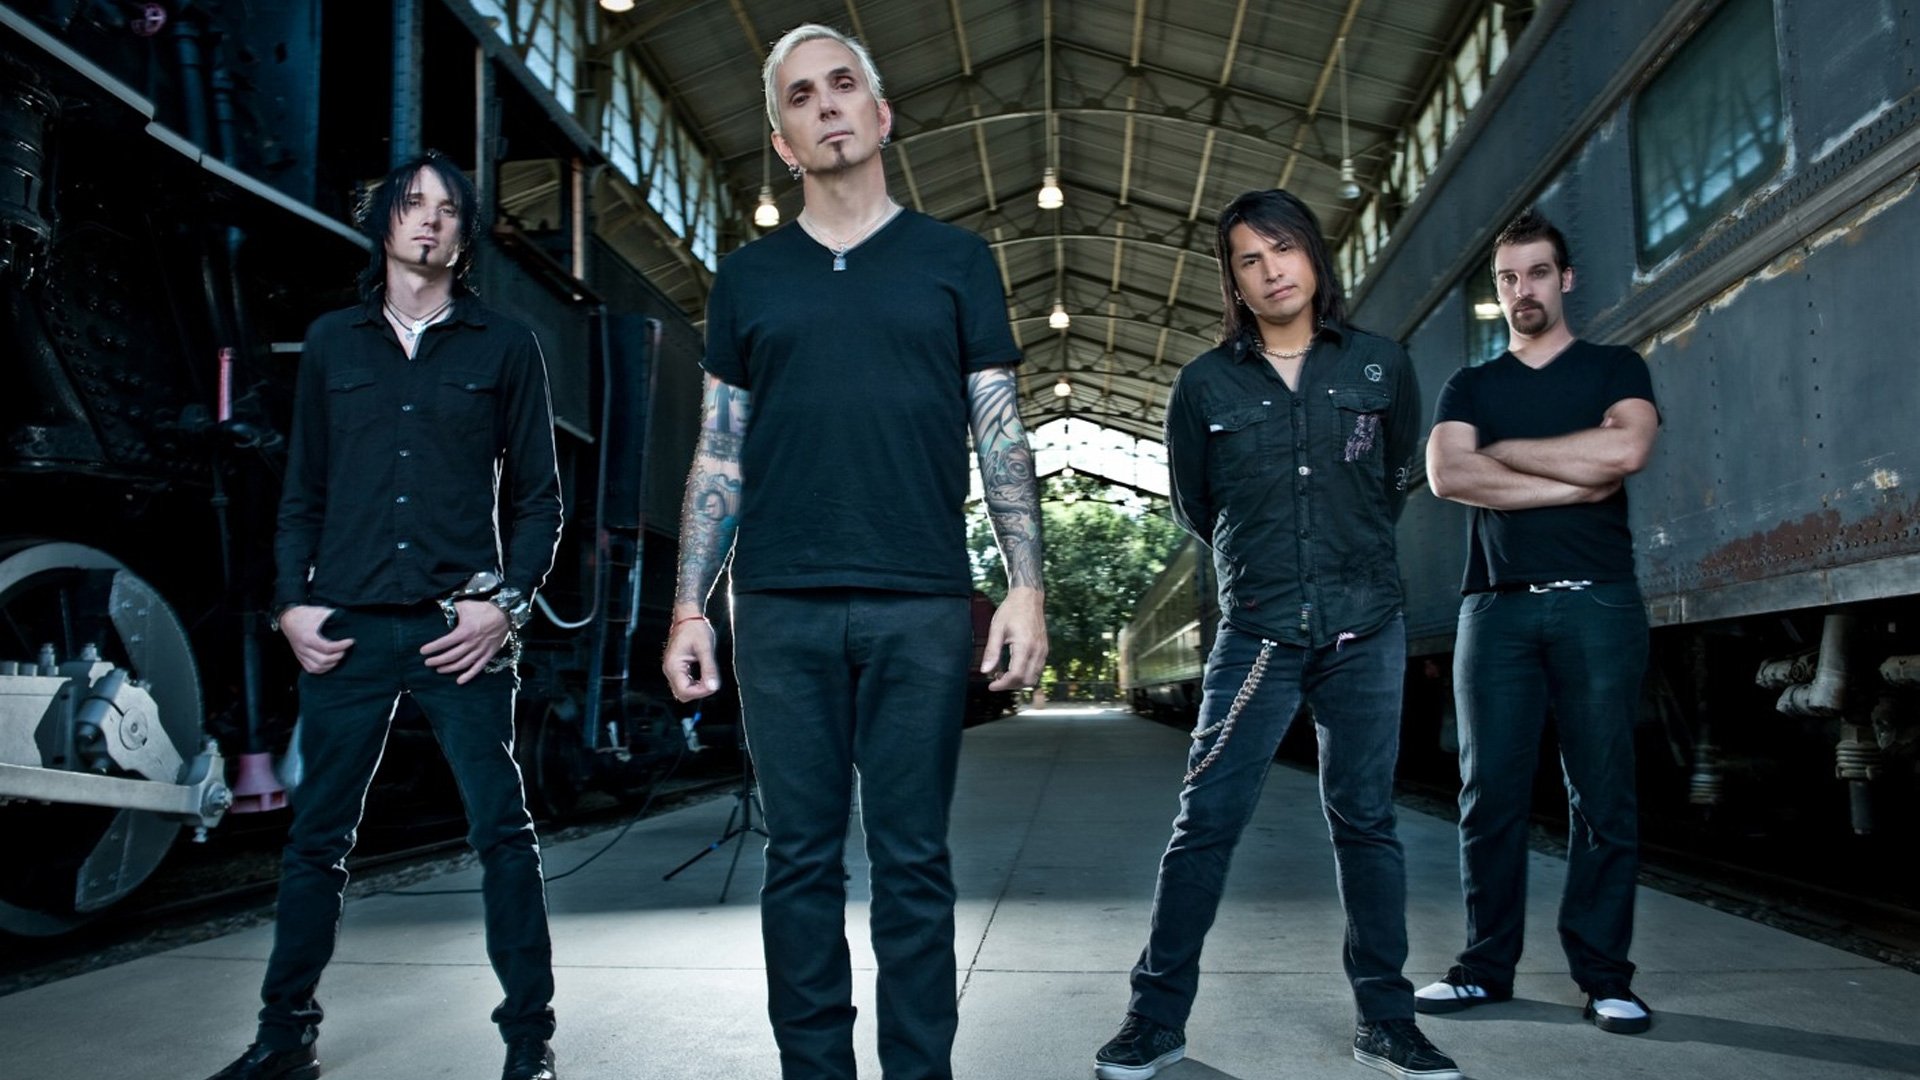 Everclear Wallpapers